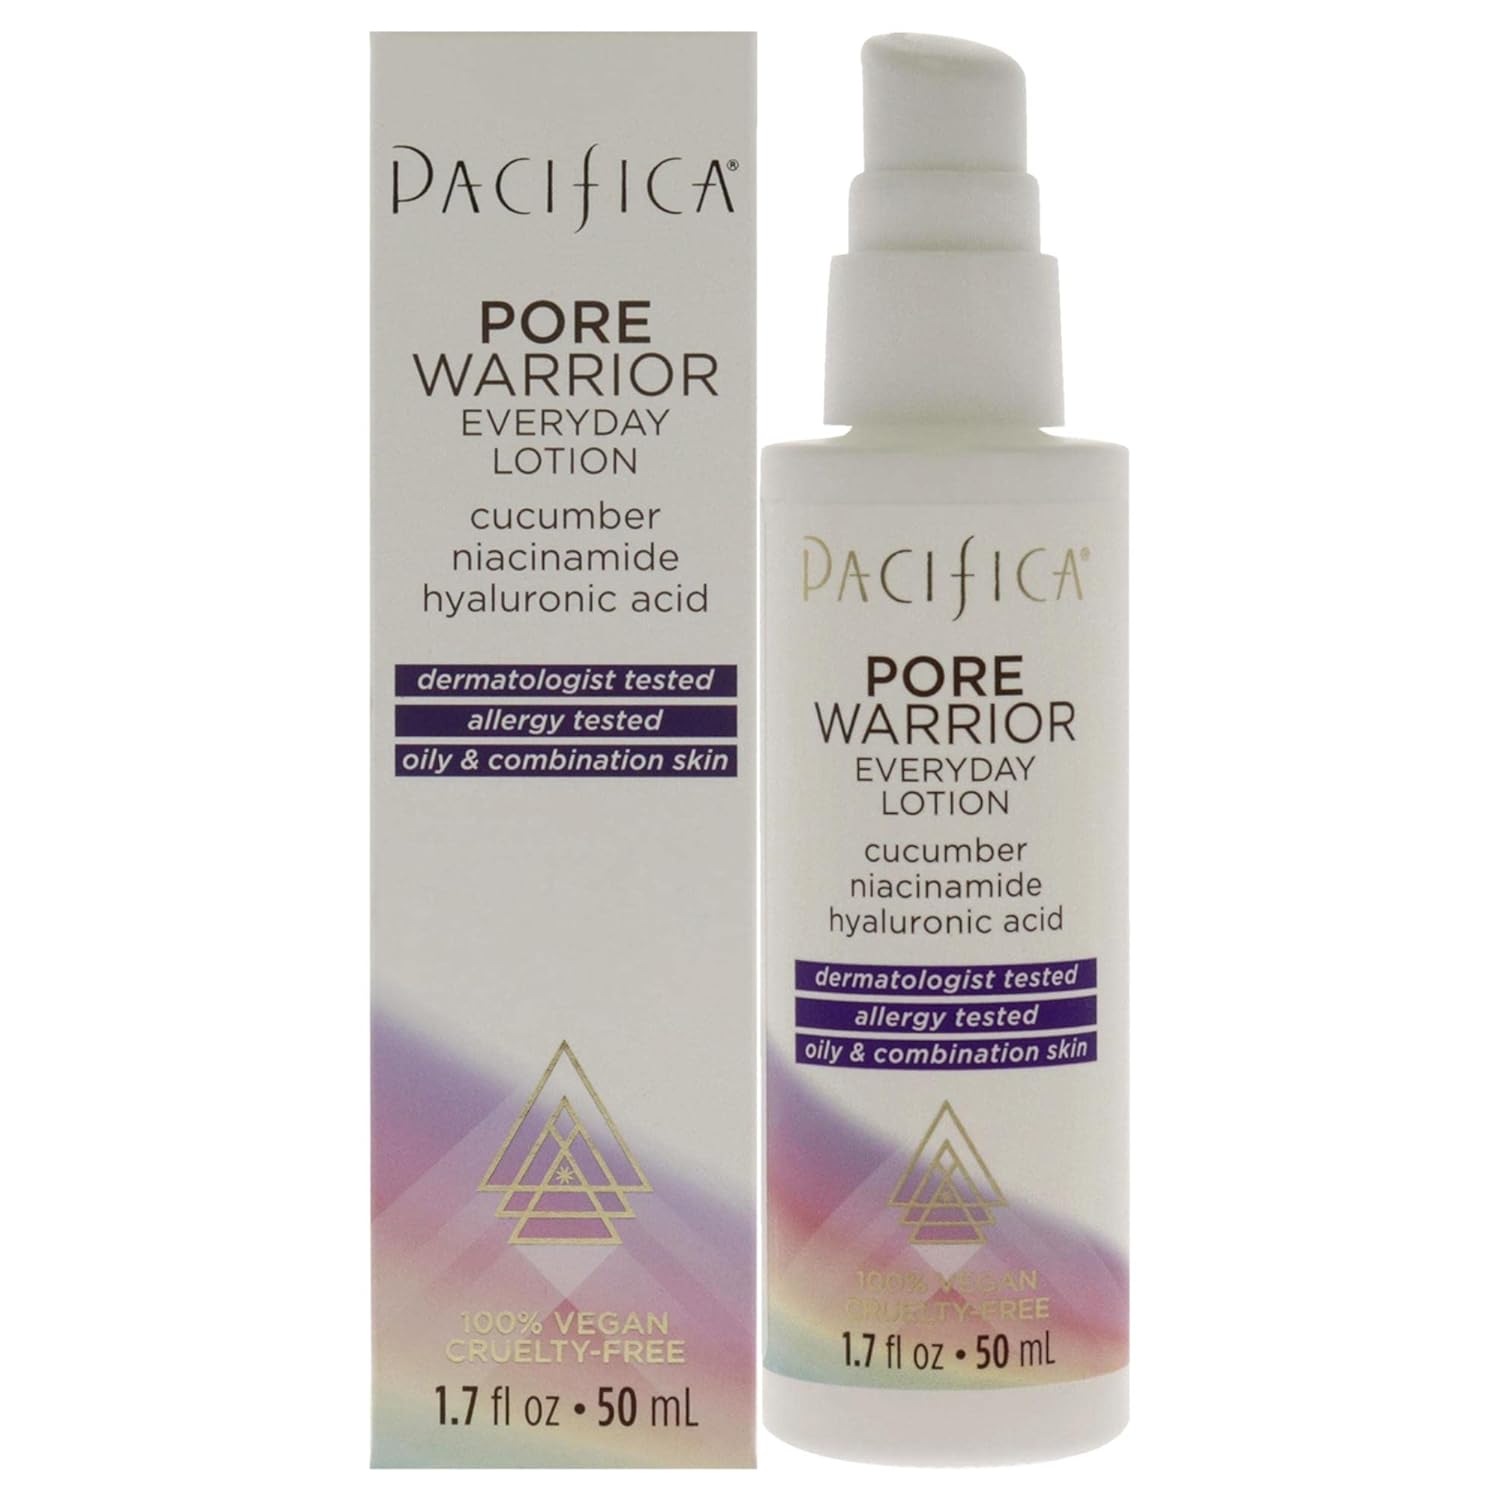 Pacifica Pore Warrior Everyday Lotion - Cucumber Lotion Women 1.7